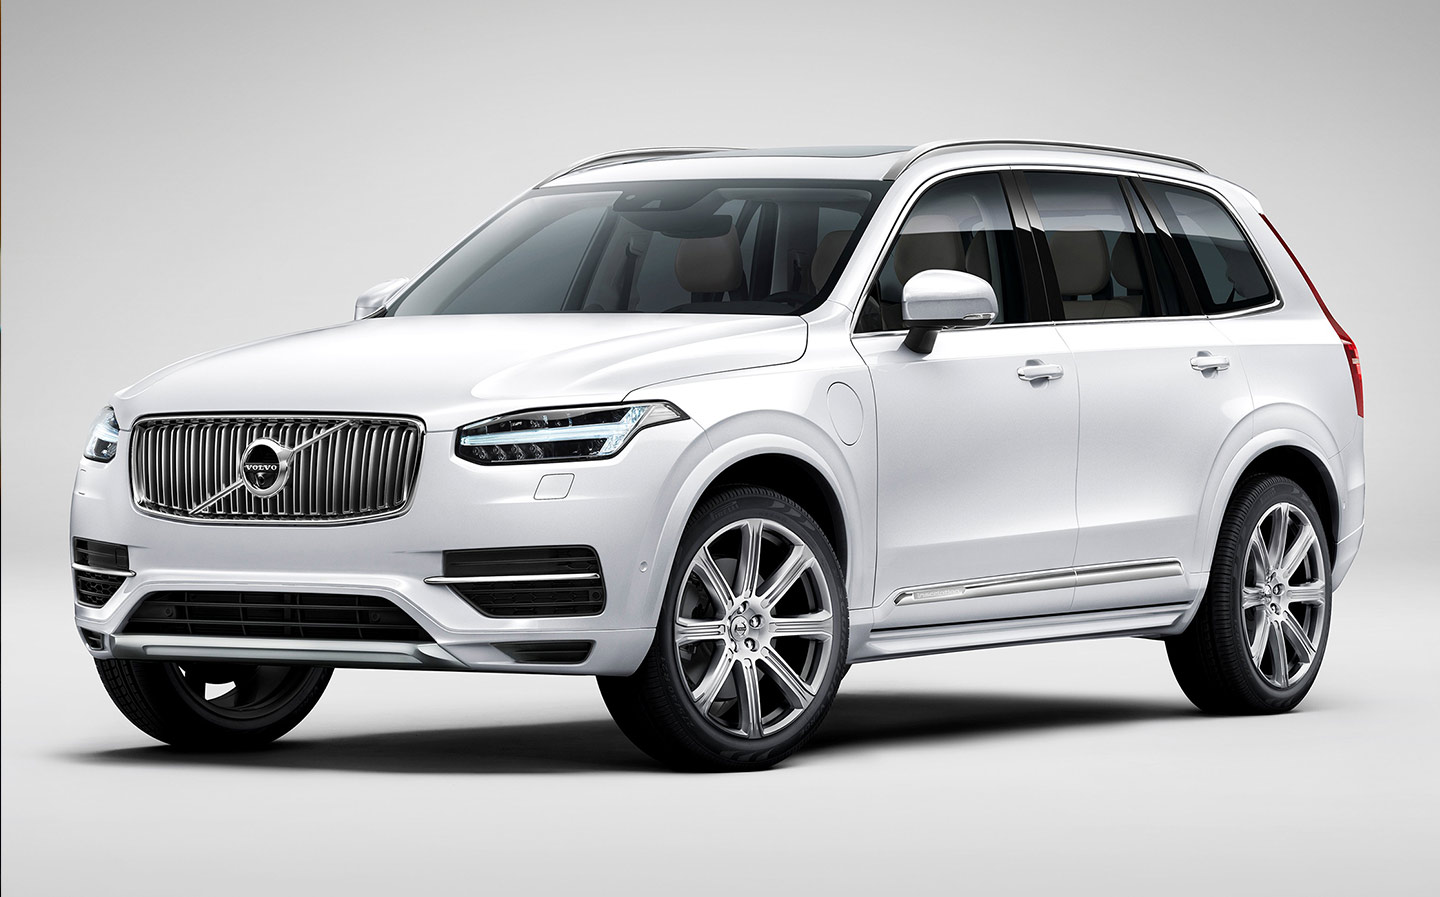 Car Clinic: Are owners of the new Volvo XC90 reporting many faults?